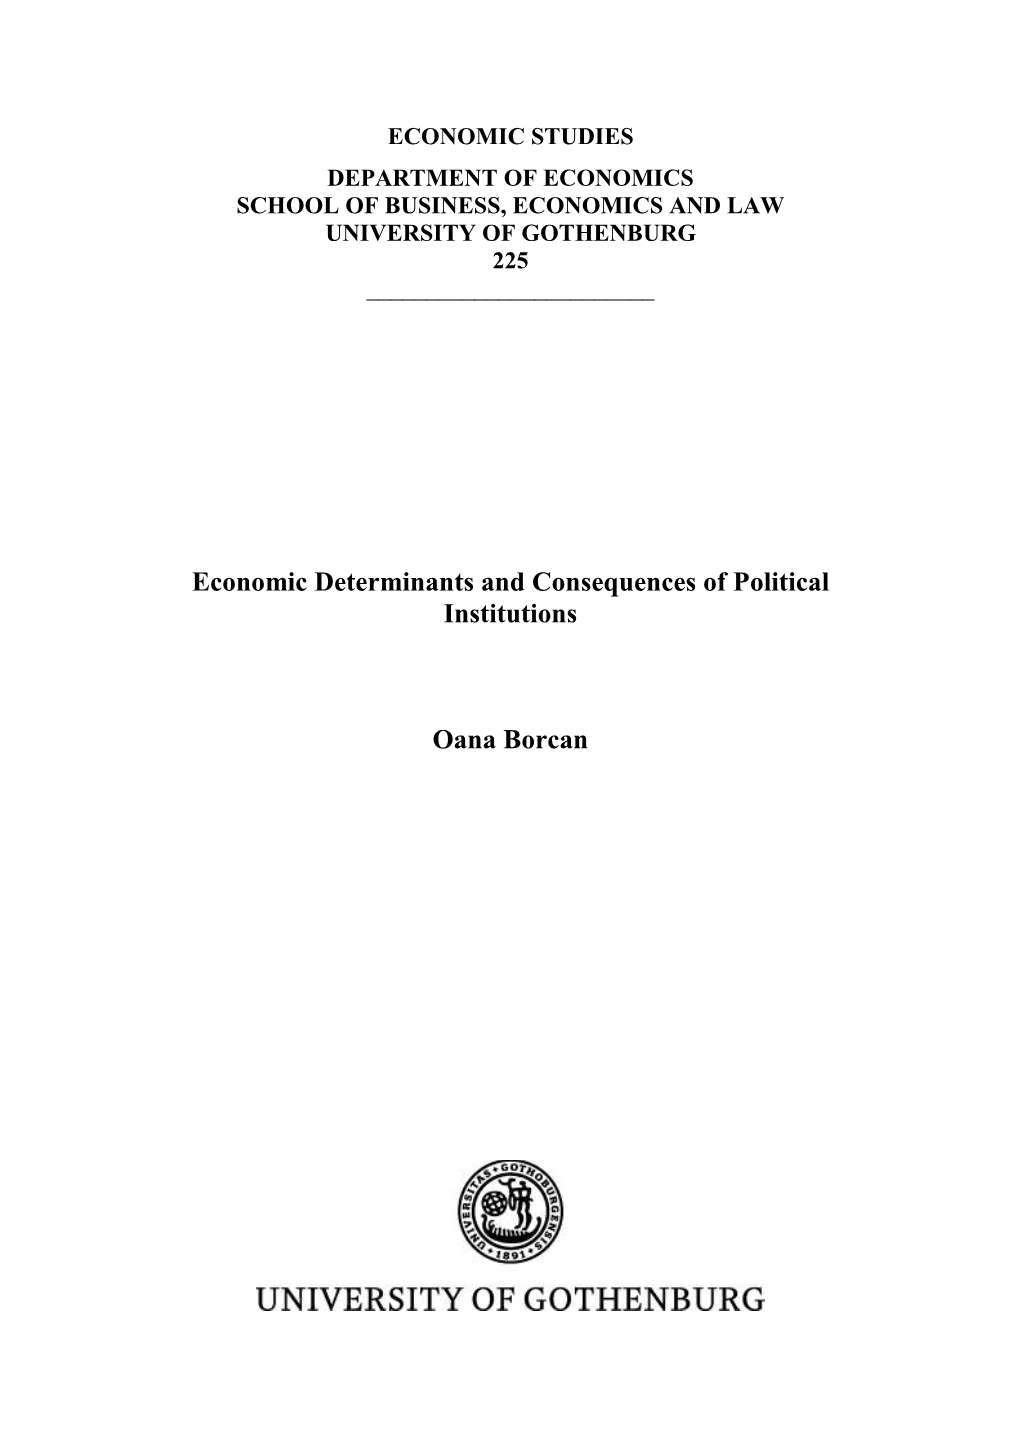 Economic Determinants and Consequences of Political Institutions